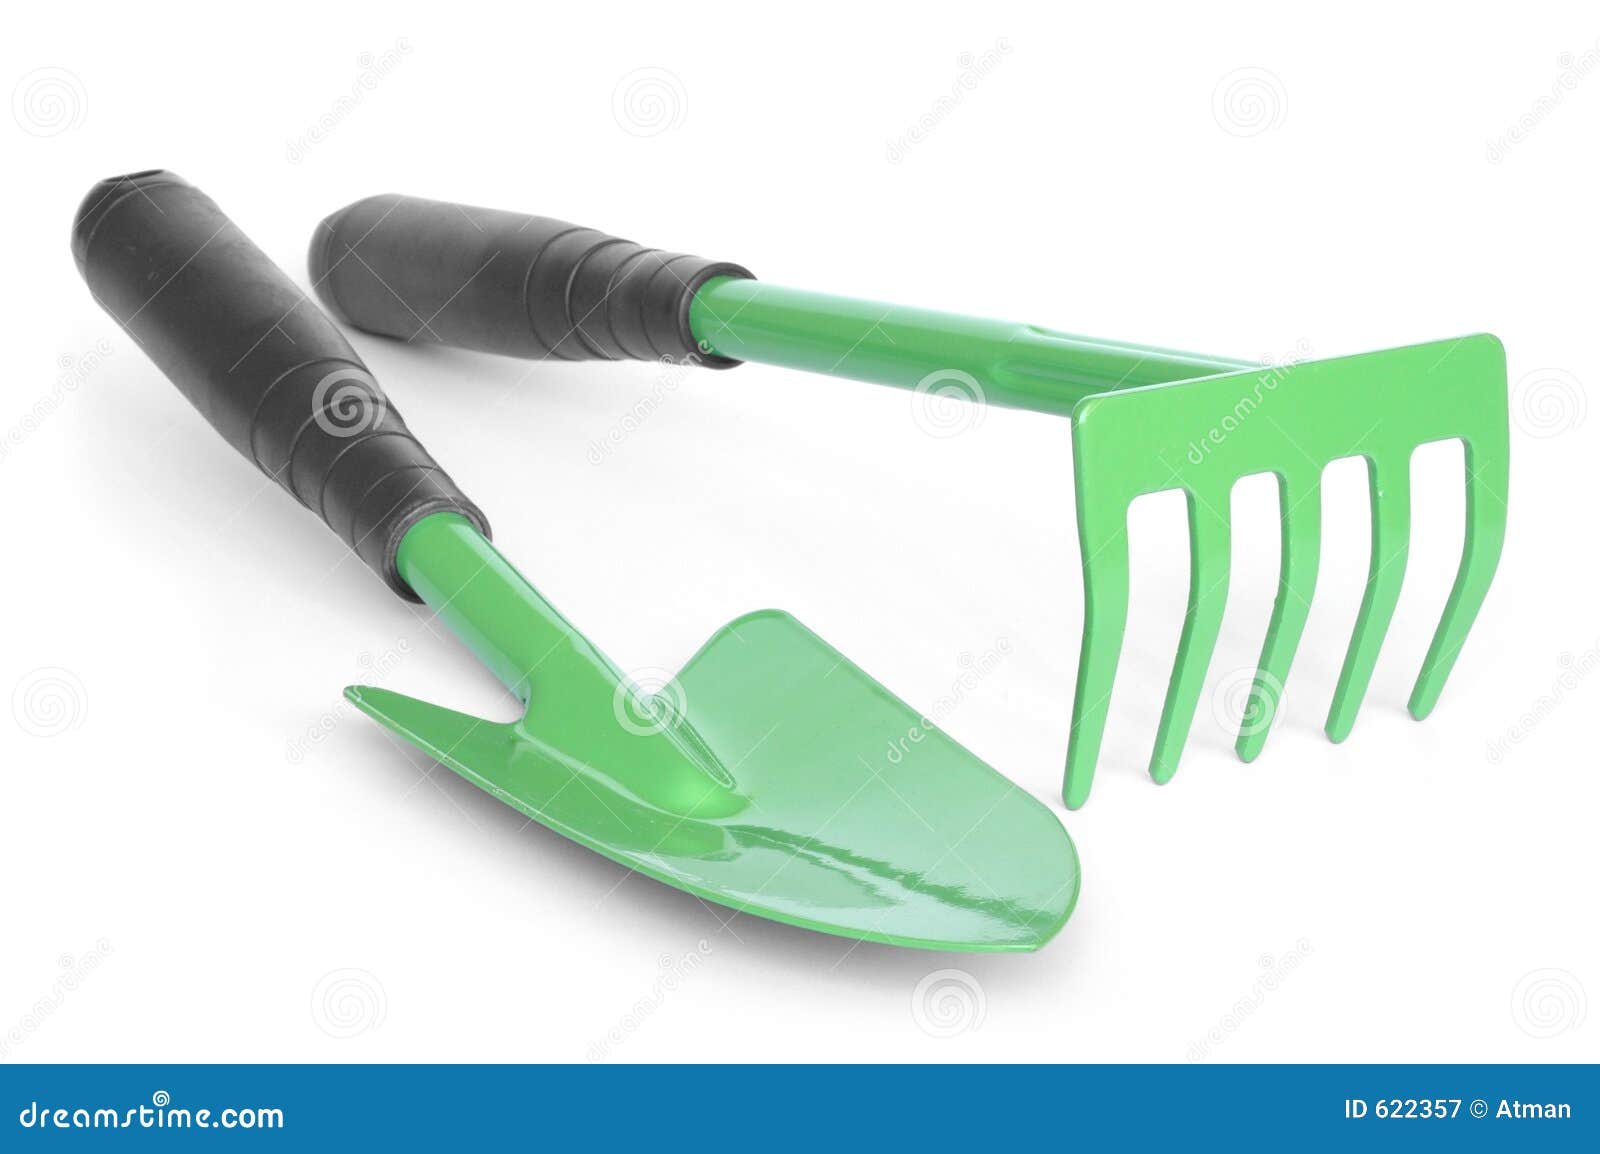 Garden Tools Royalty Free Stock Photography - Image: 622357